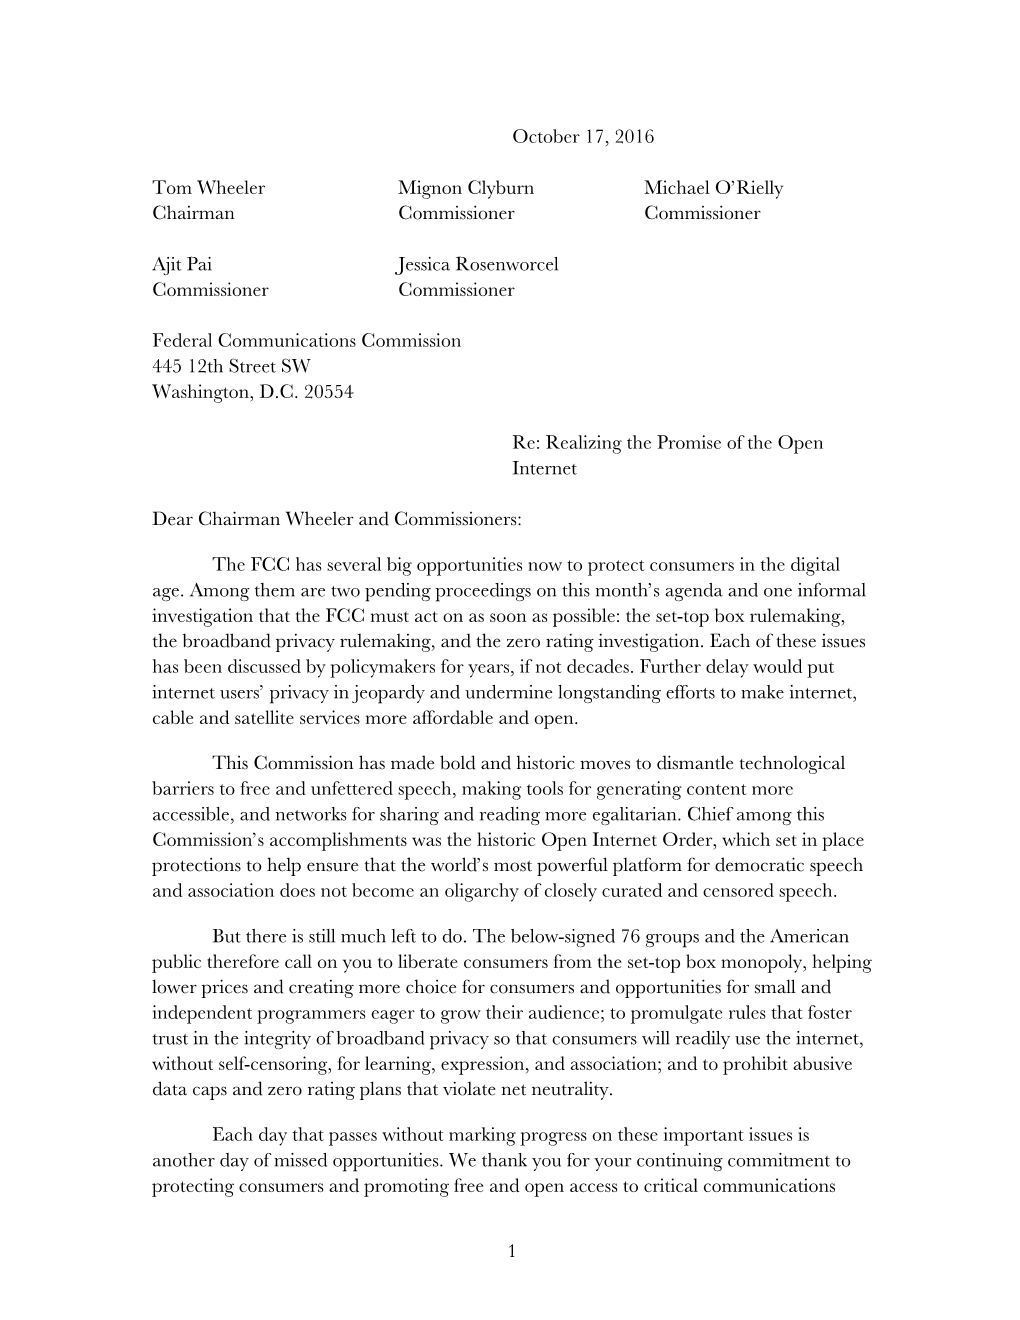 Group Letter to FCC Re Realizing The